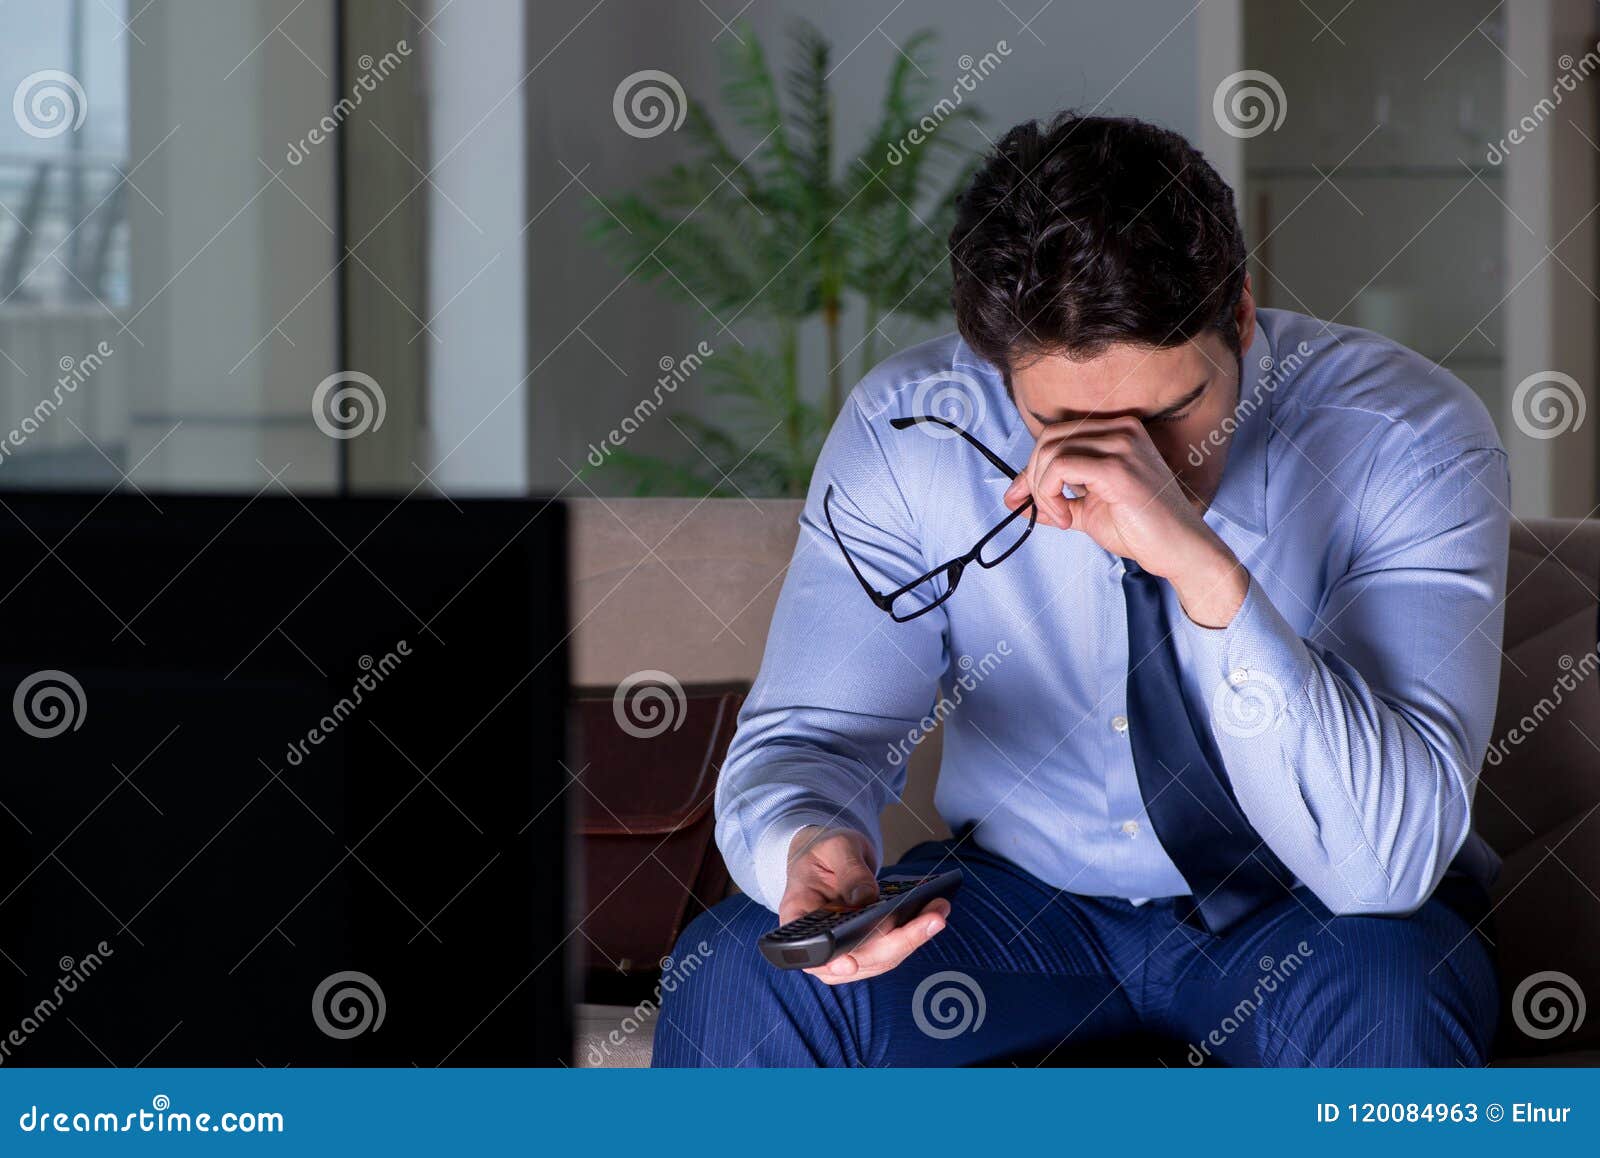 The Businessman Watching  Tv  At Night  Late Stock Image 